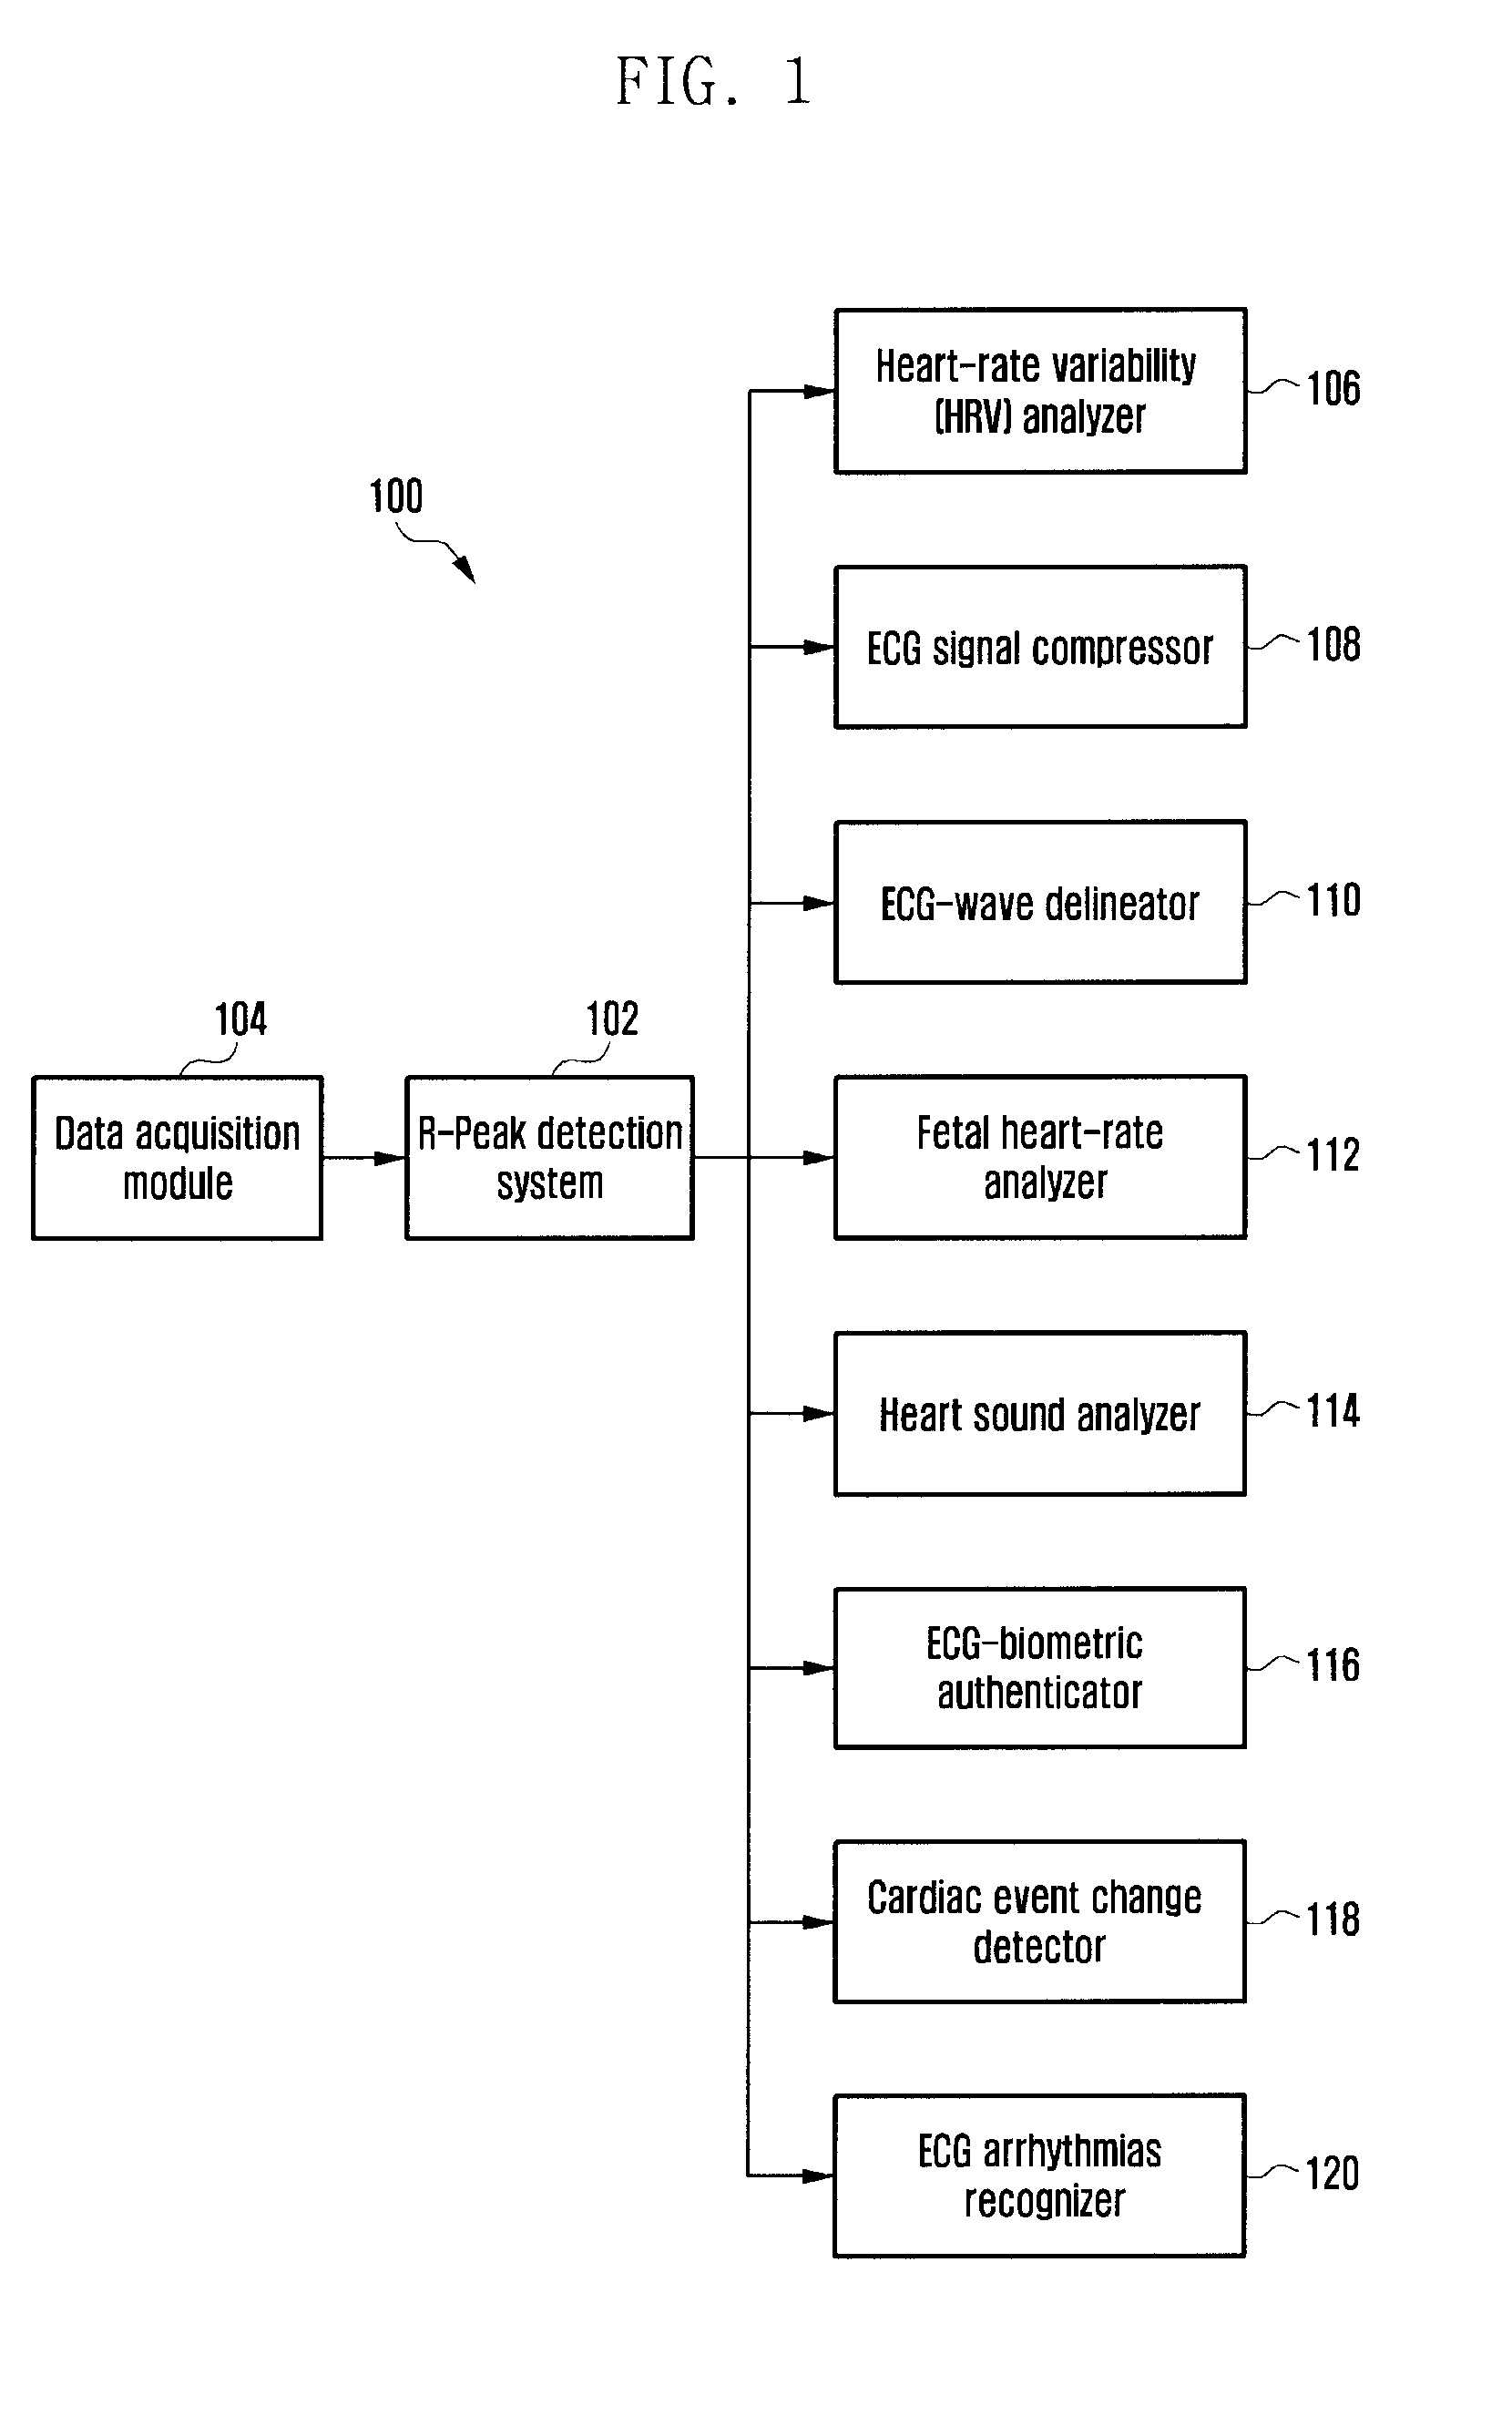 Method and system for determining qrs complexes in electrocardiogram signals